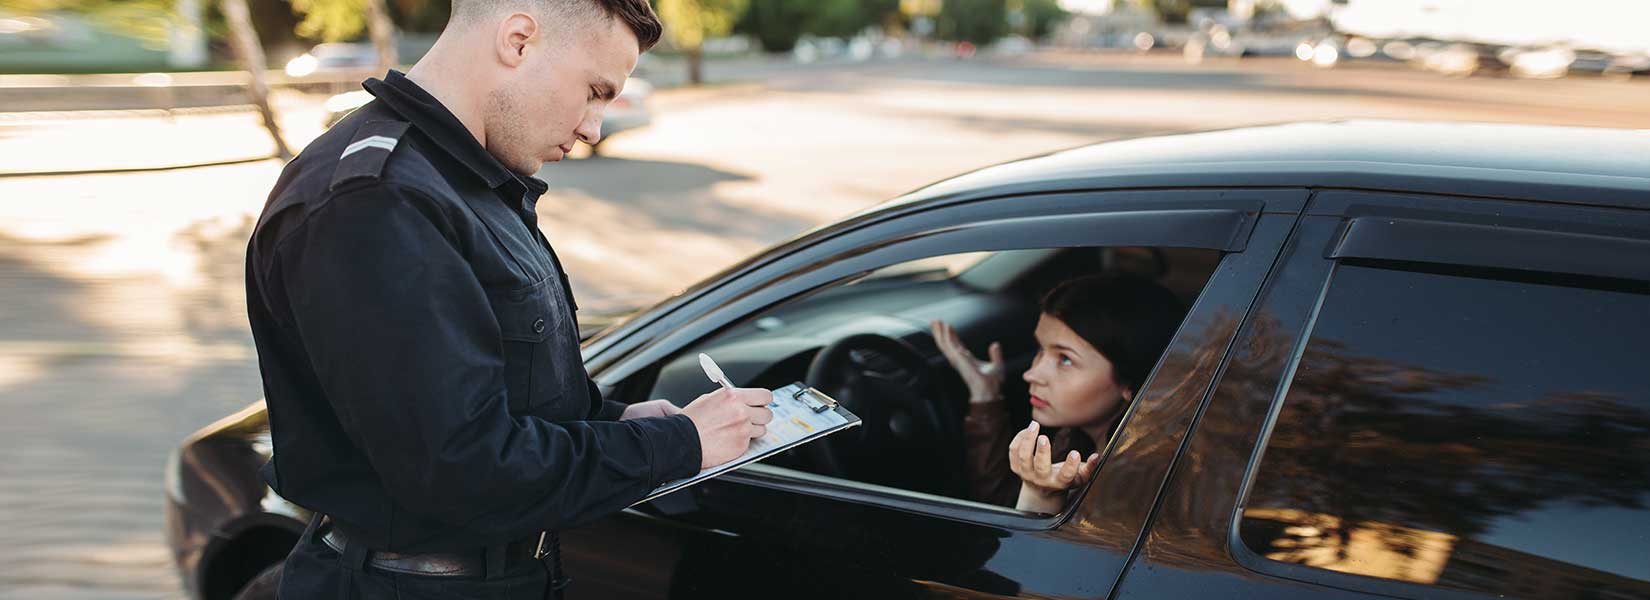 How to Get Temporary License After Dui 